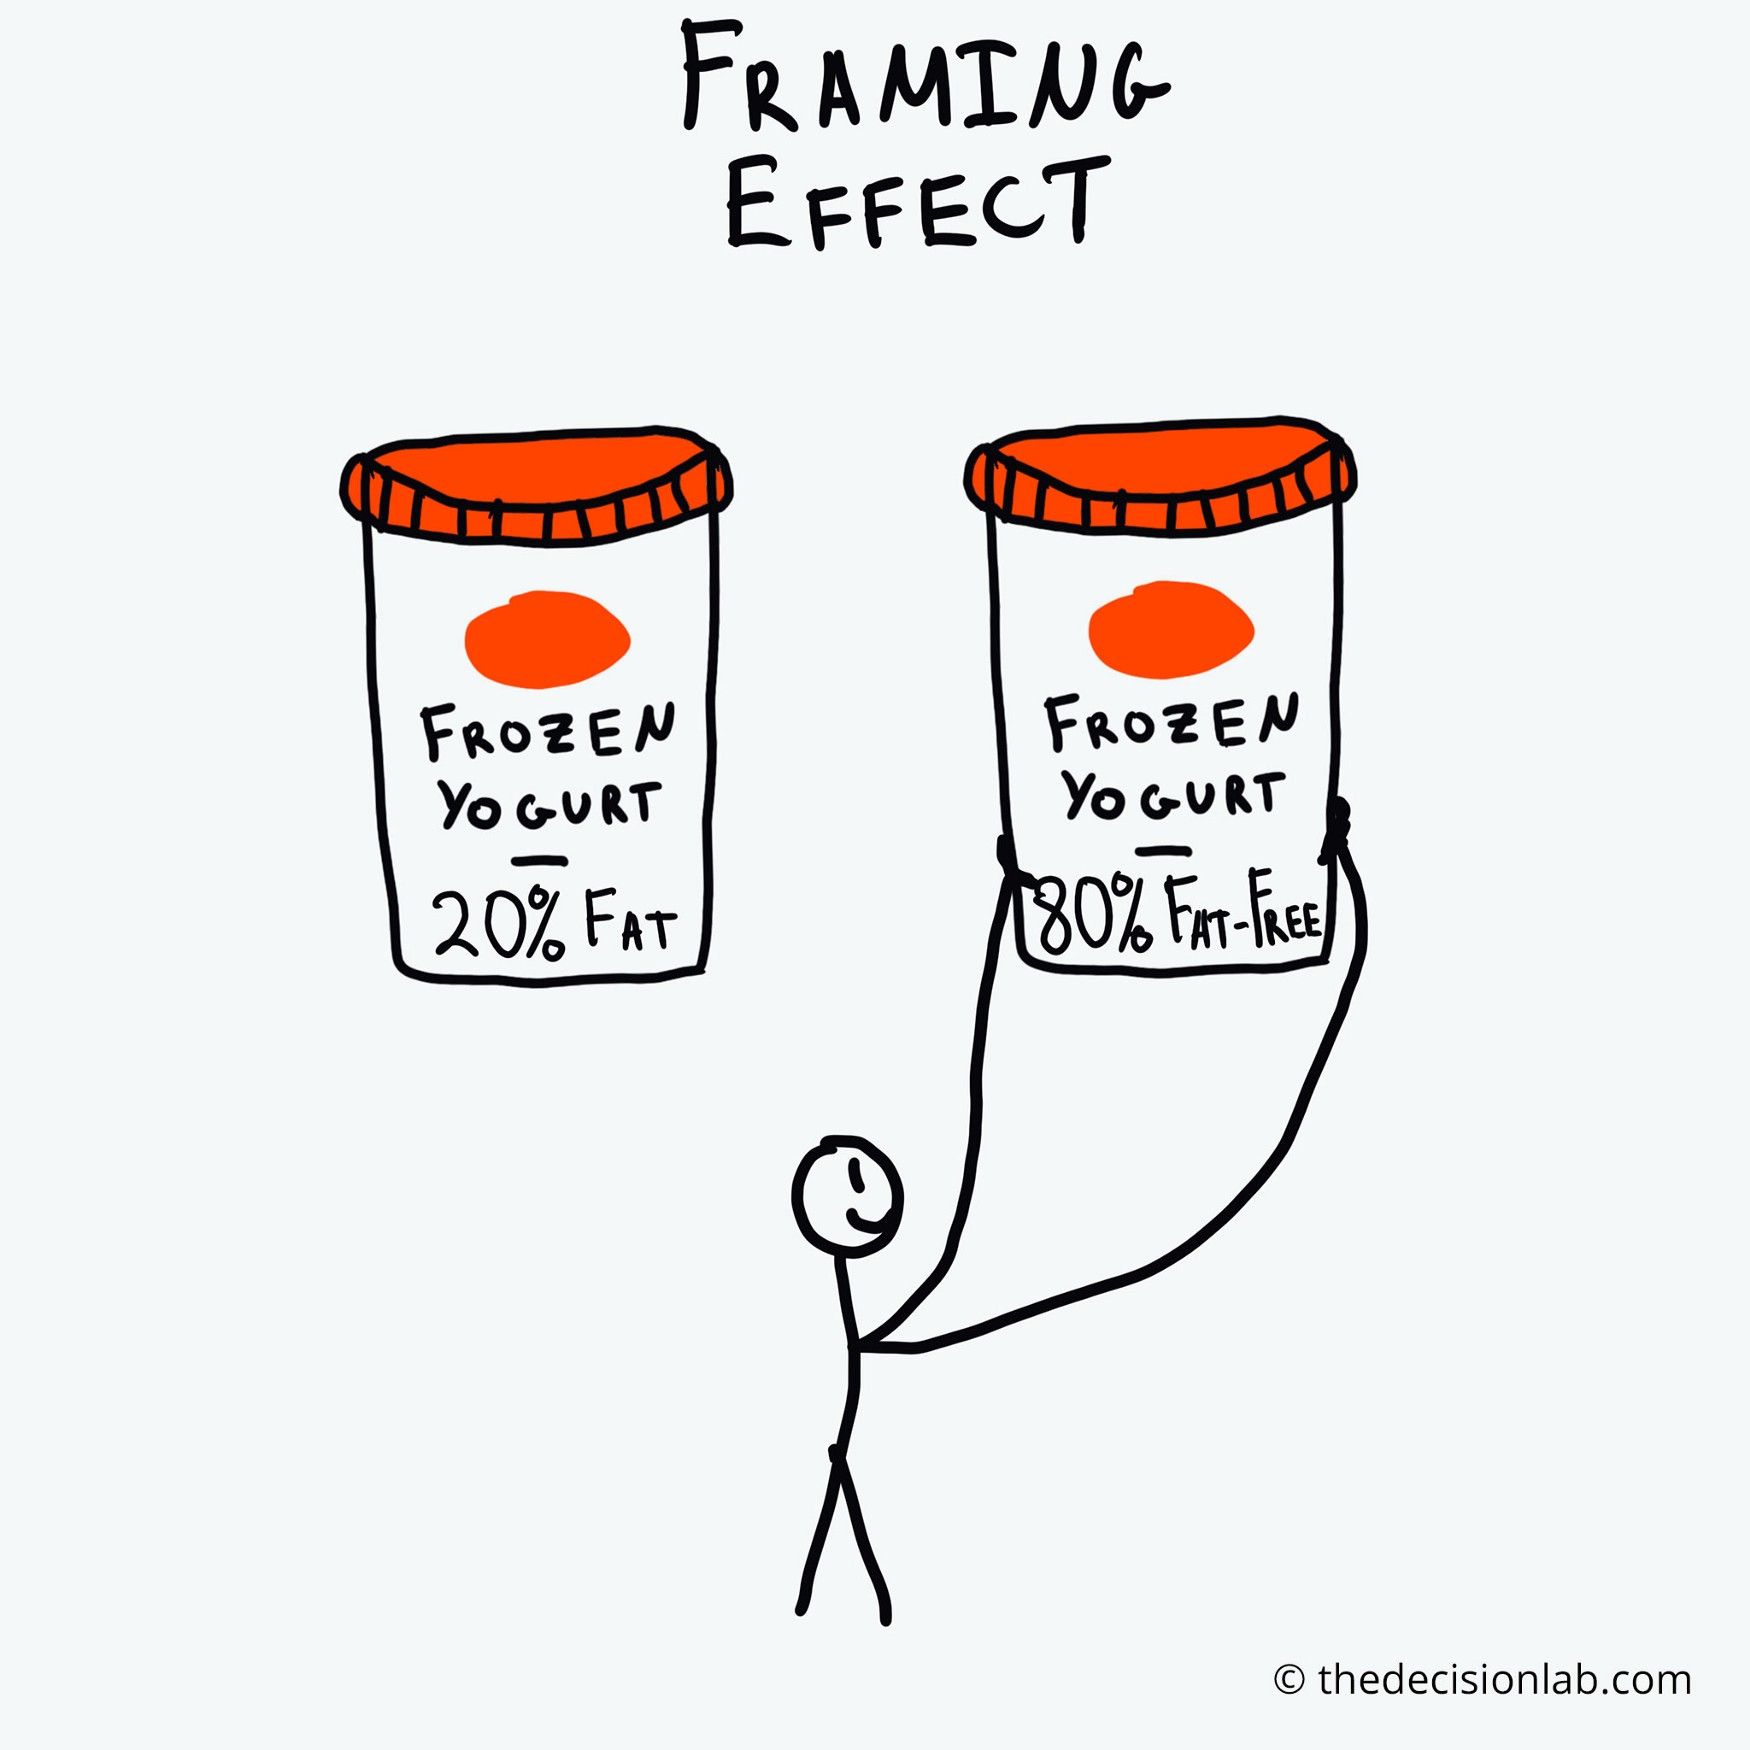 The framing effect. Source: The Decision Lab